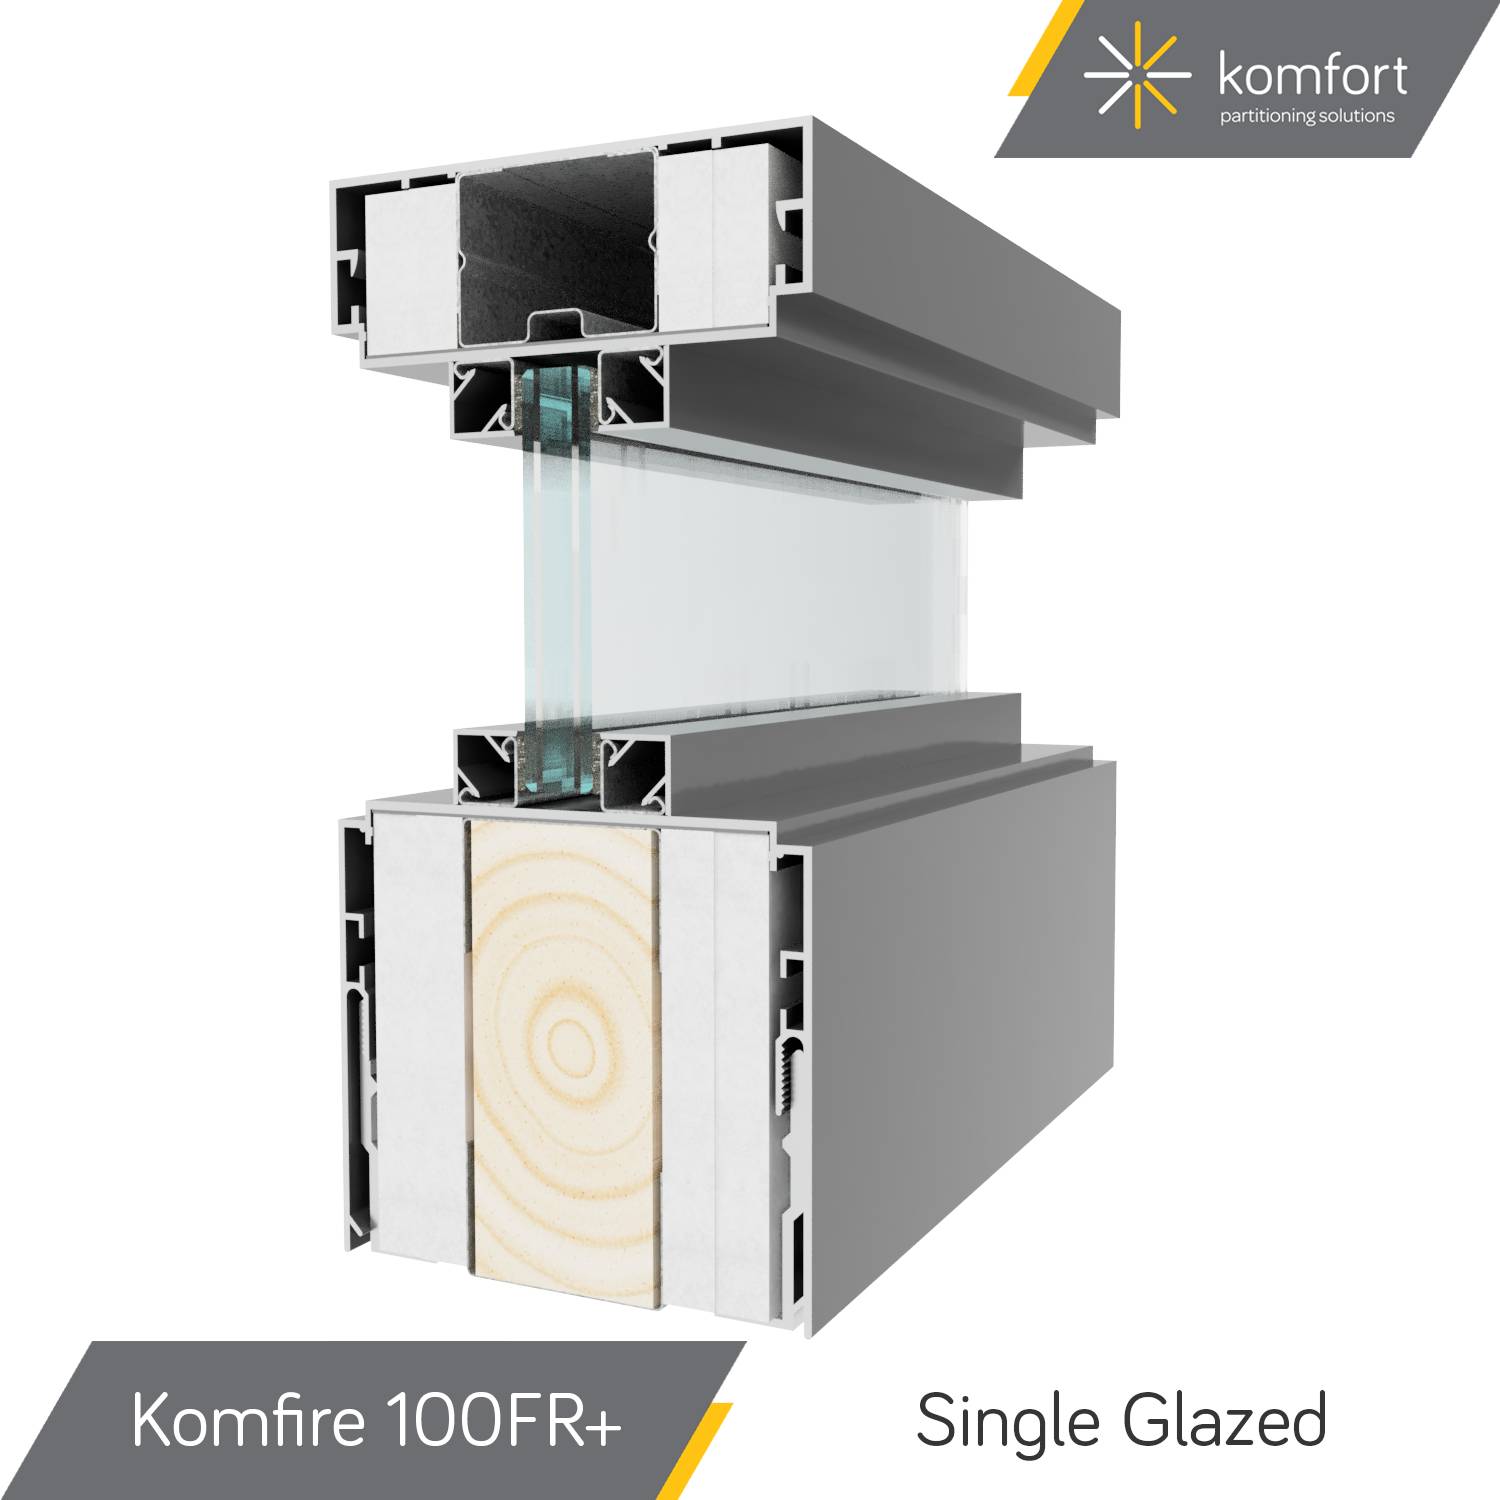 Komfort | Komfire 100FR+ | 30/0-60/0 Fire Rated Solid & Glazed Partitioning